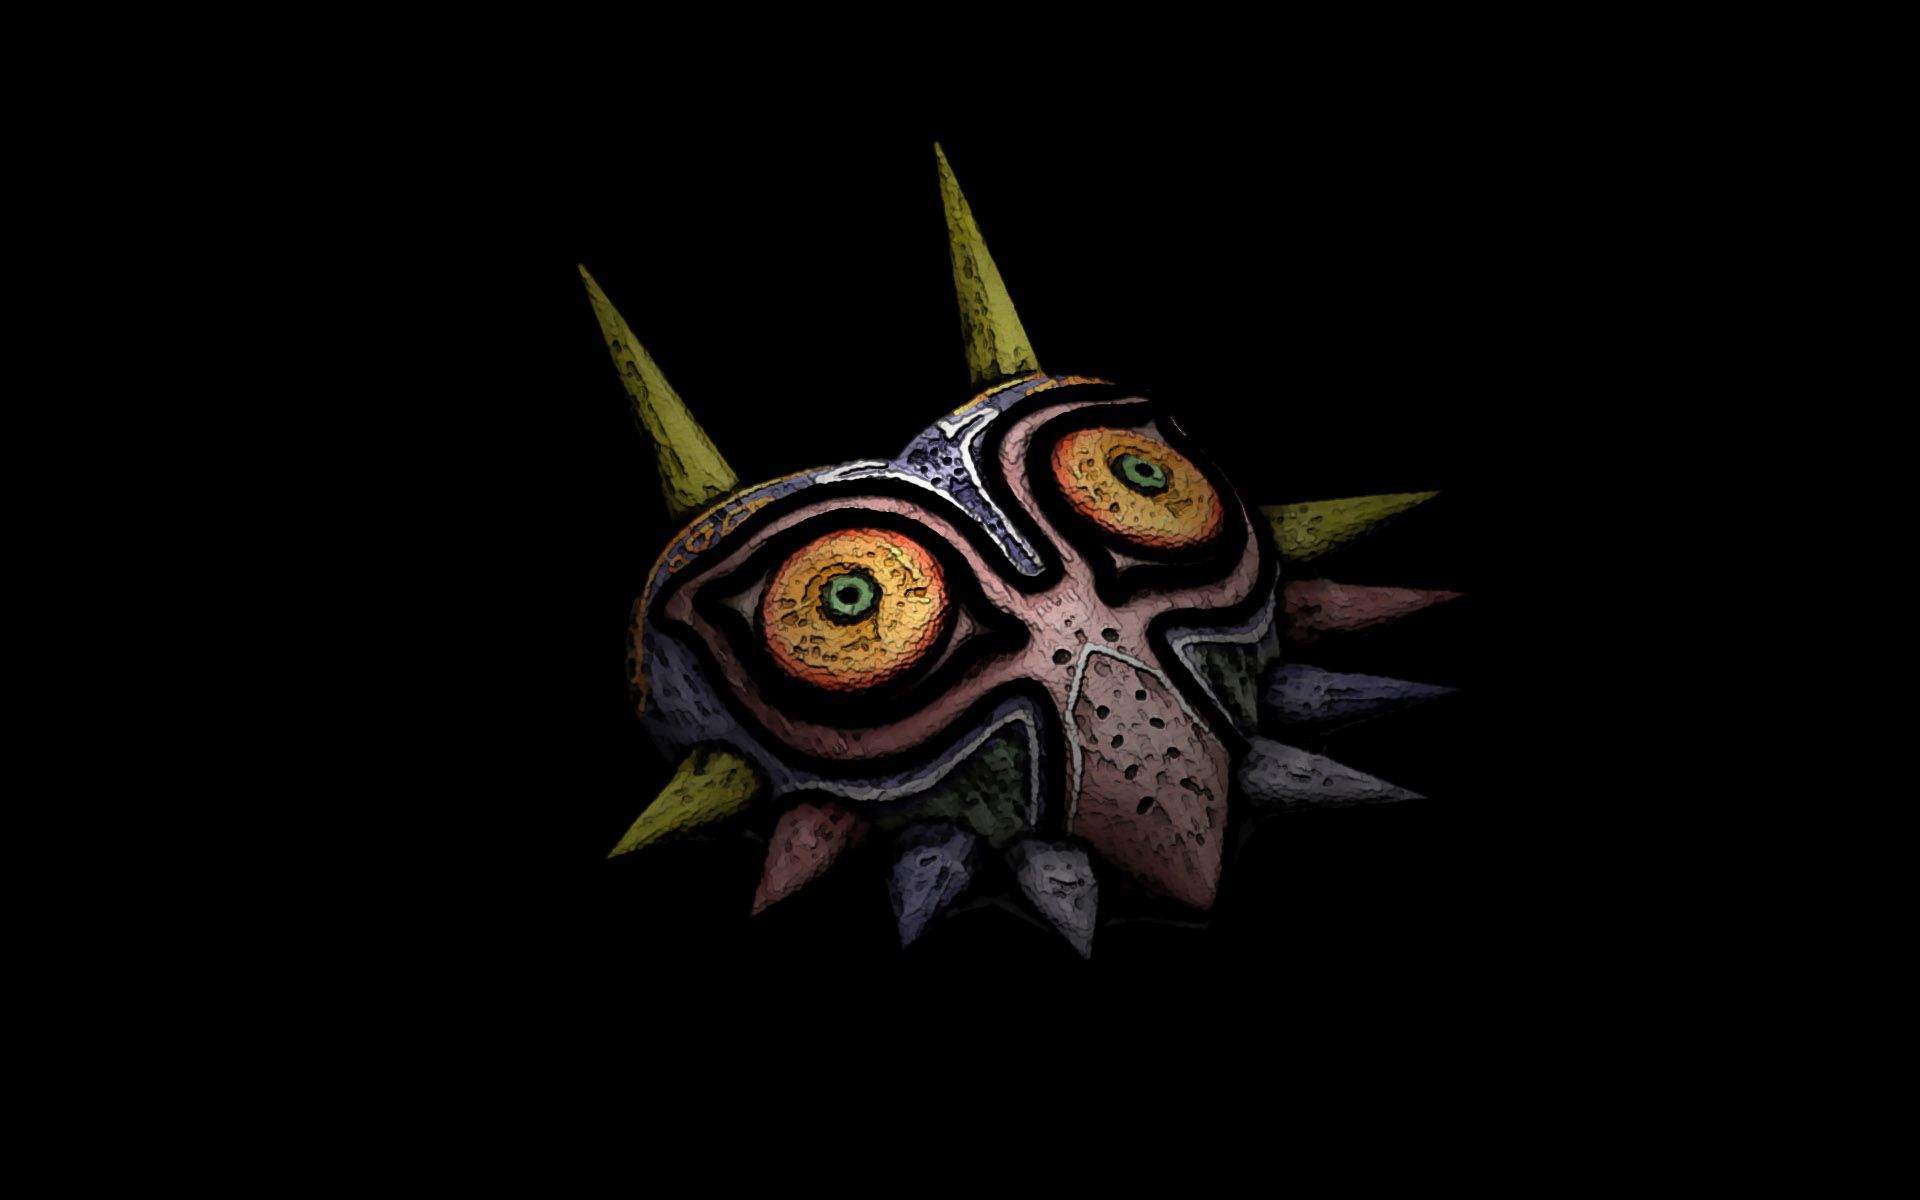 free download majoras mask wallpapers full hd wallpaper search 1920x1200 for your desktop mobile tablet explore 44 majoras mask wallpaper hd majoras mask wallpaper majora s mask 3ds wallpaper mask wallpapers majoras mask wallpaper hd